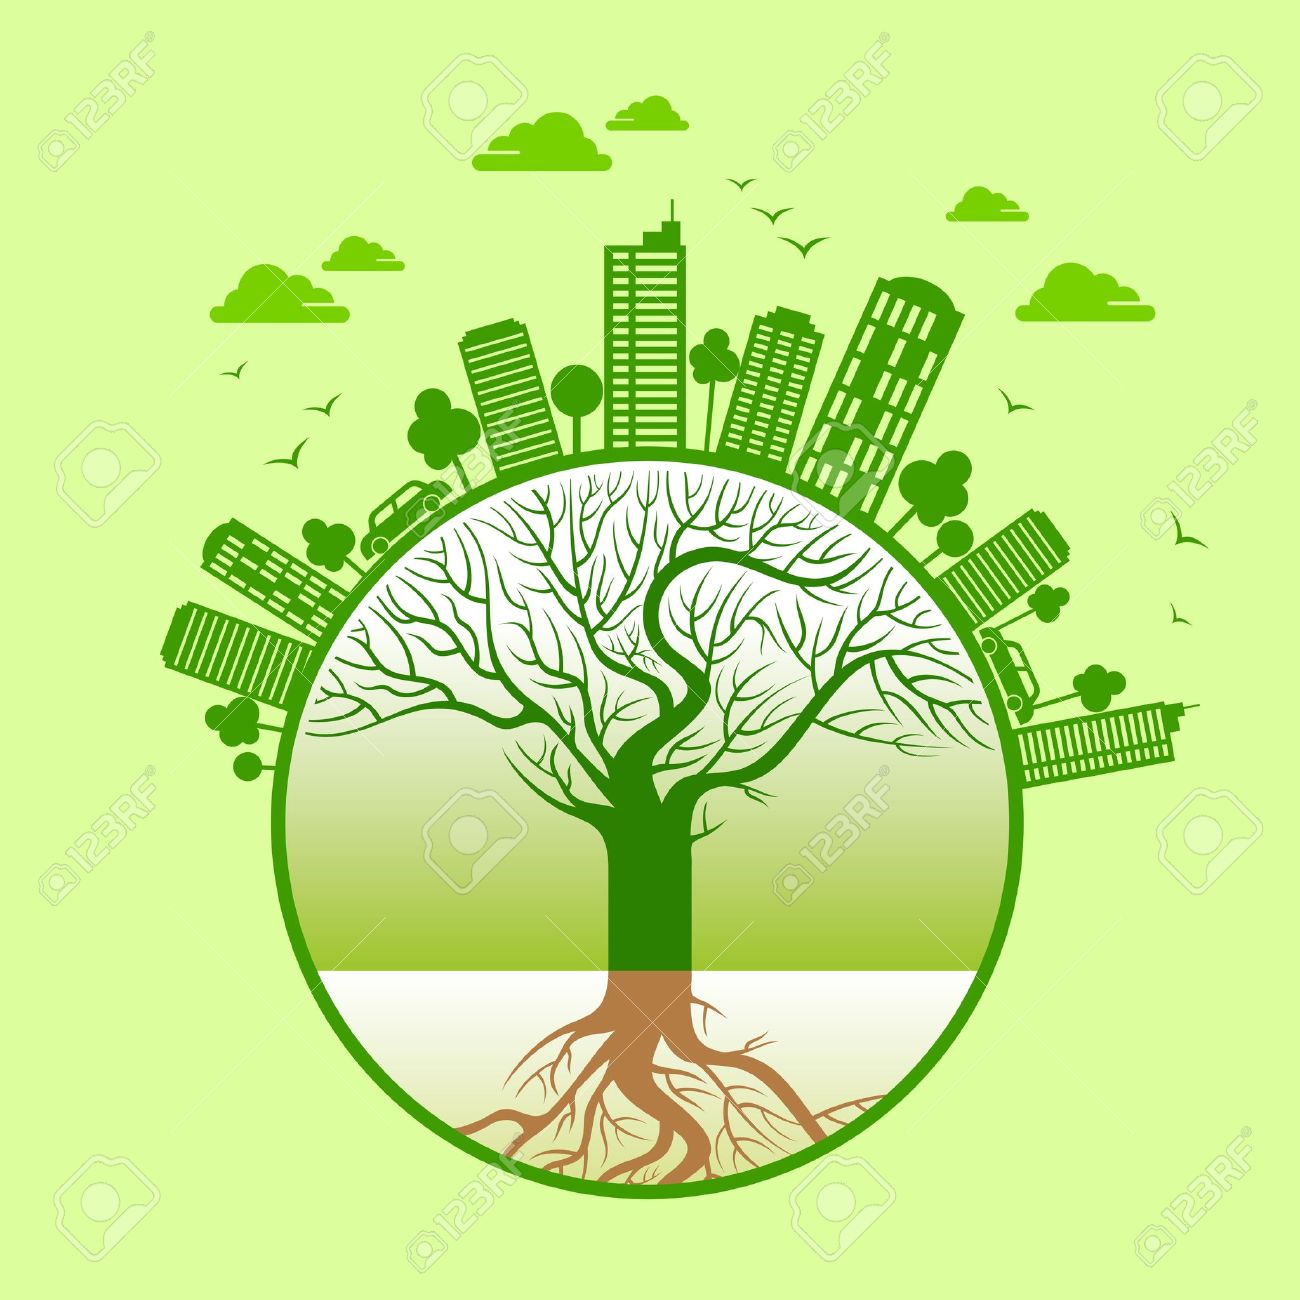 plant trees to save our planet